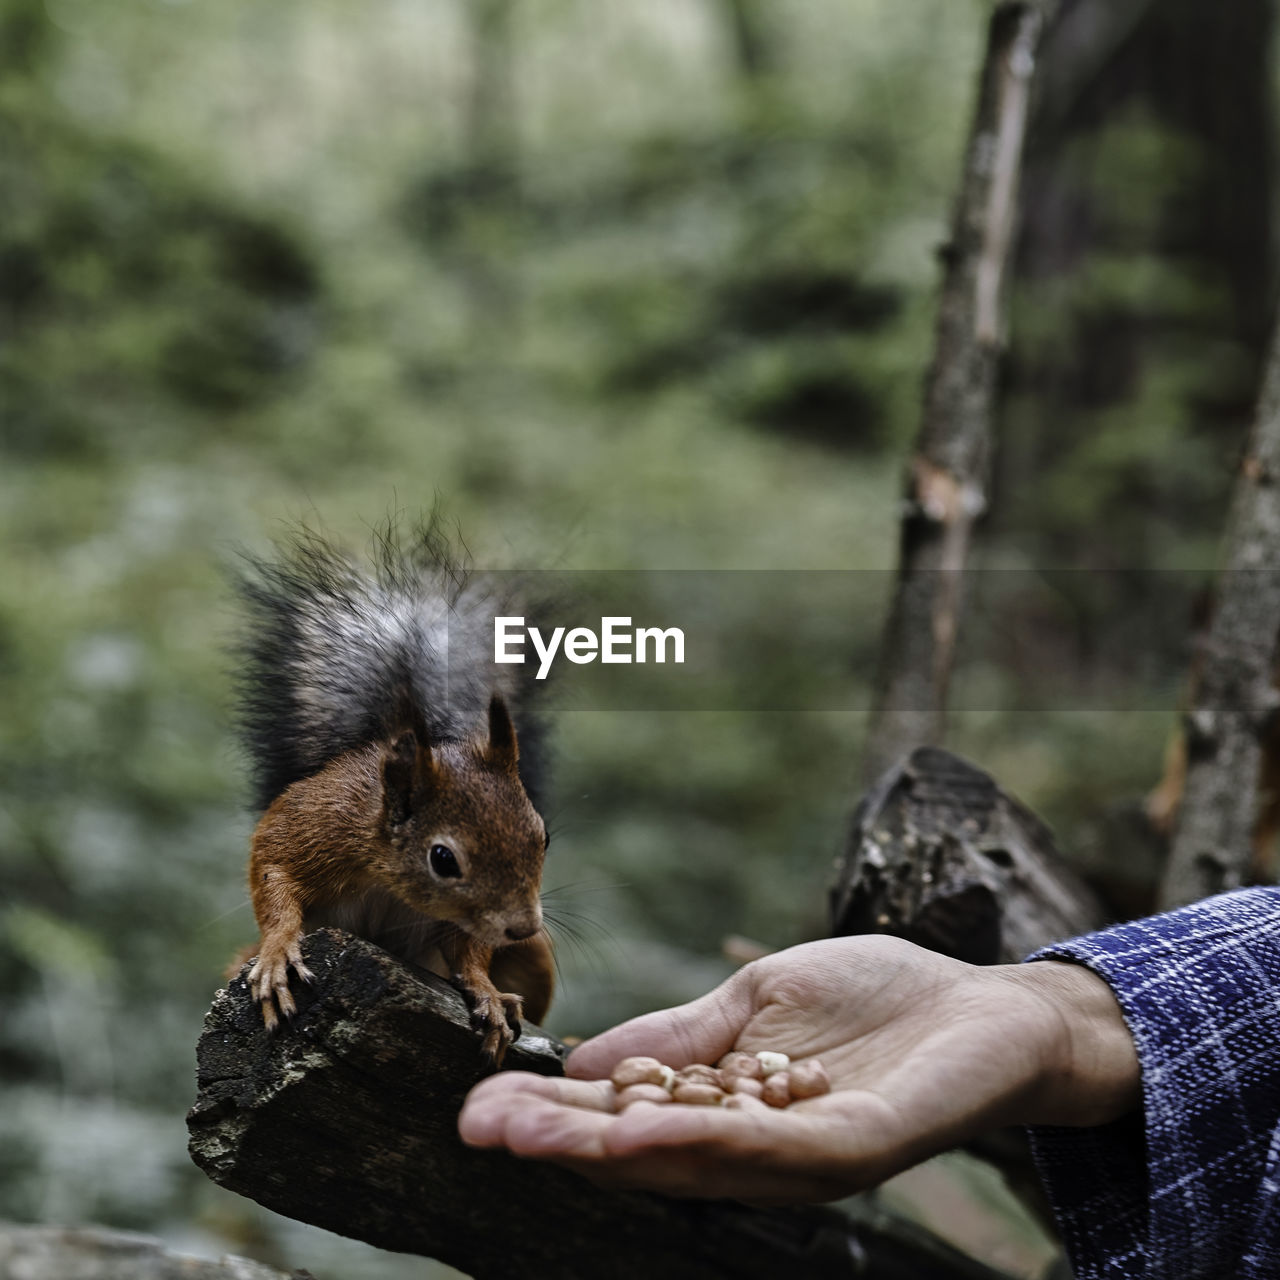 Cropped hand of person feeding squirrel